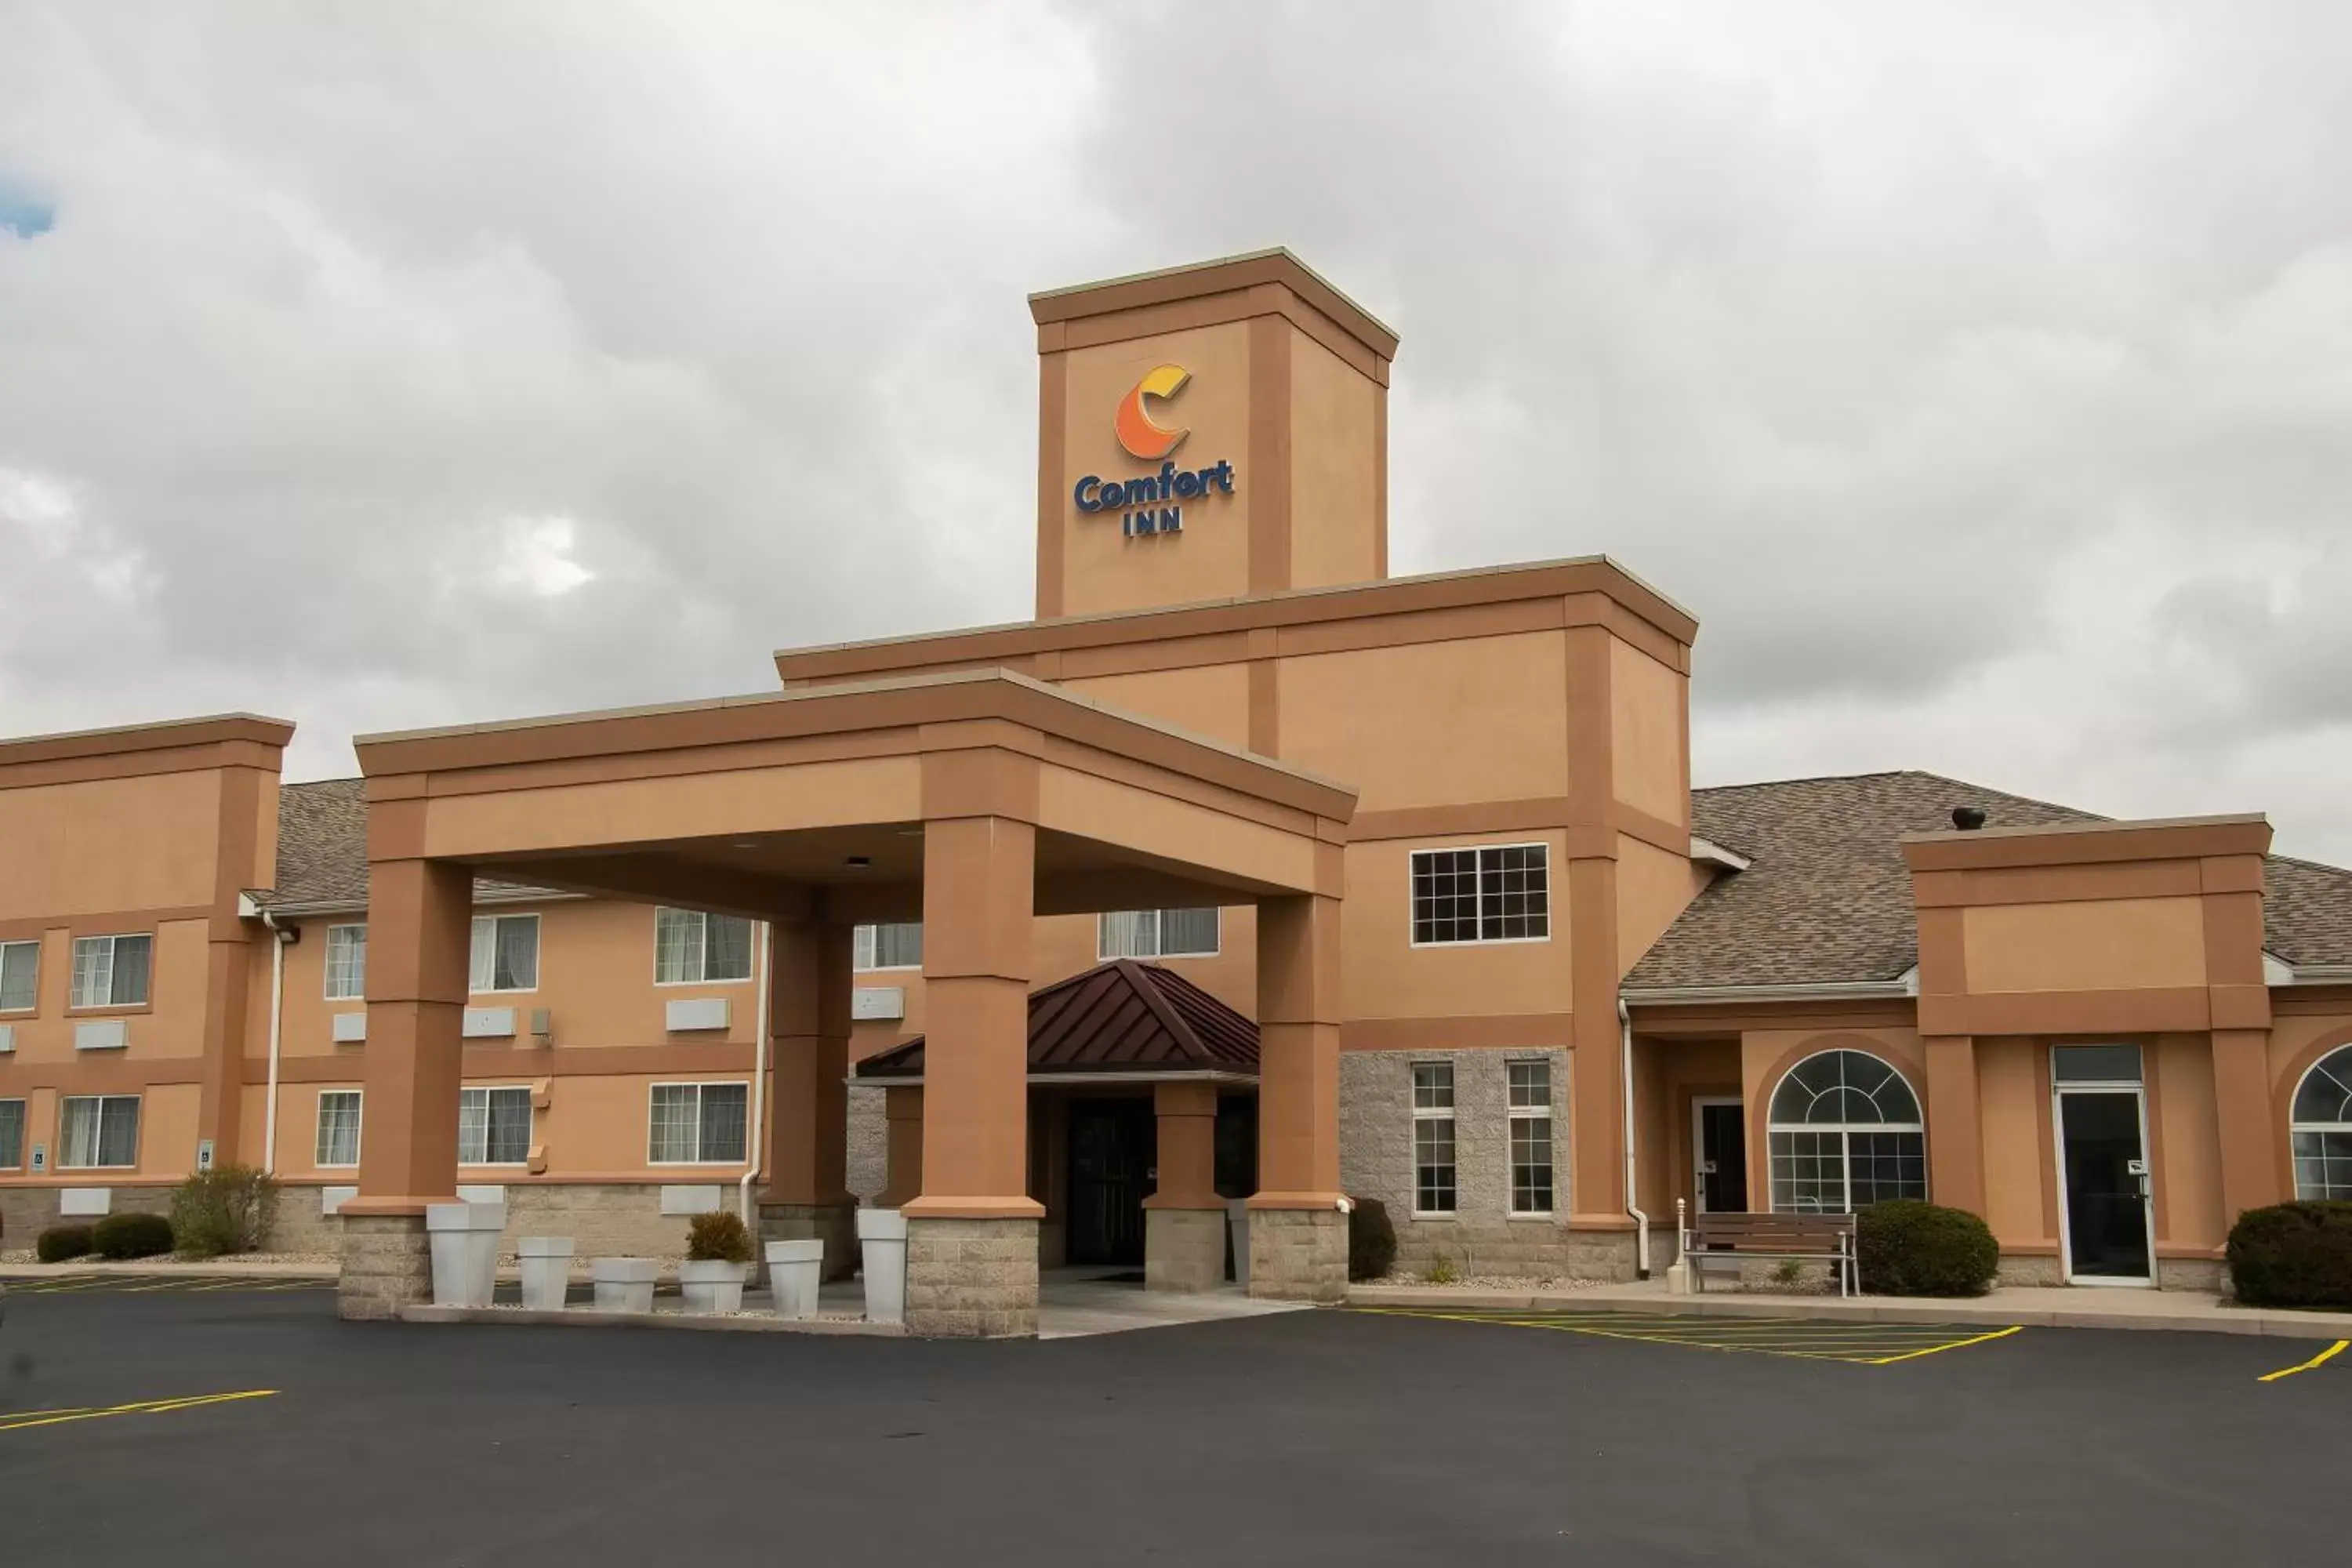 Property Building in Comfort Inn Near Ouabache State Park